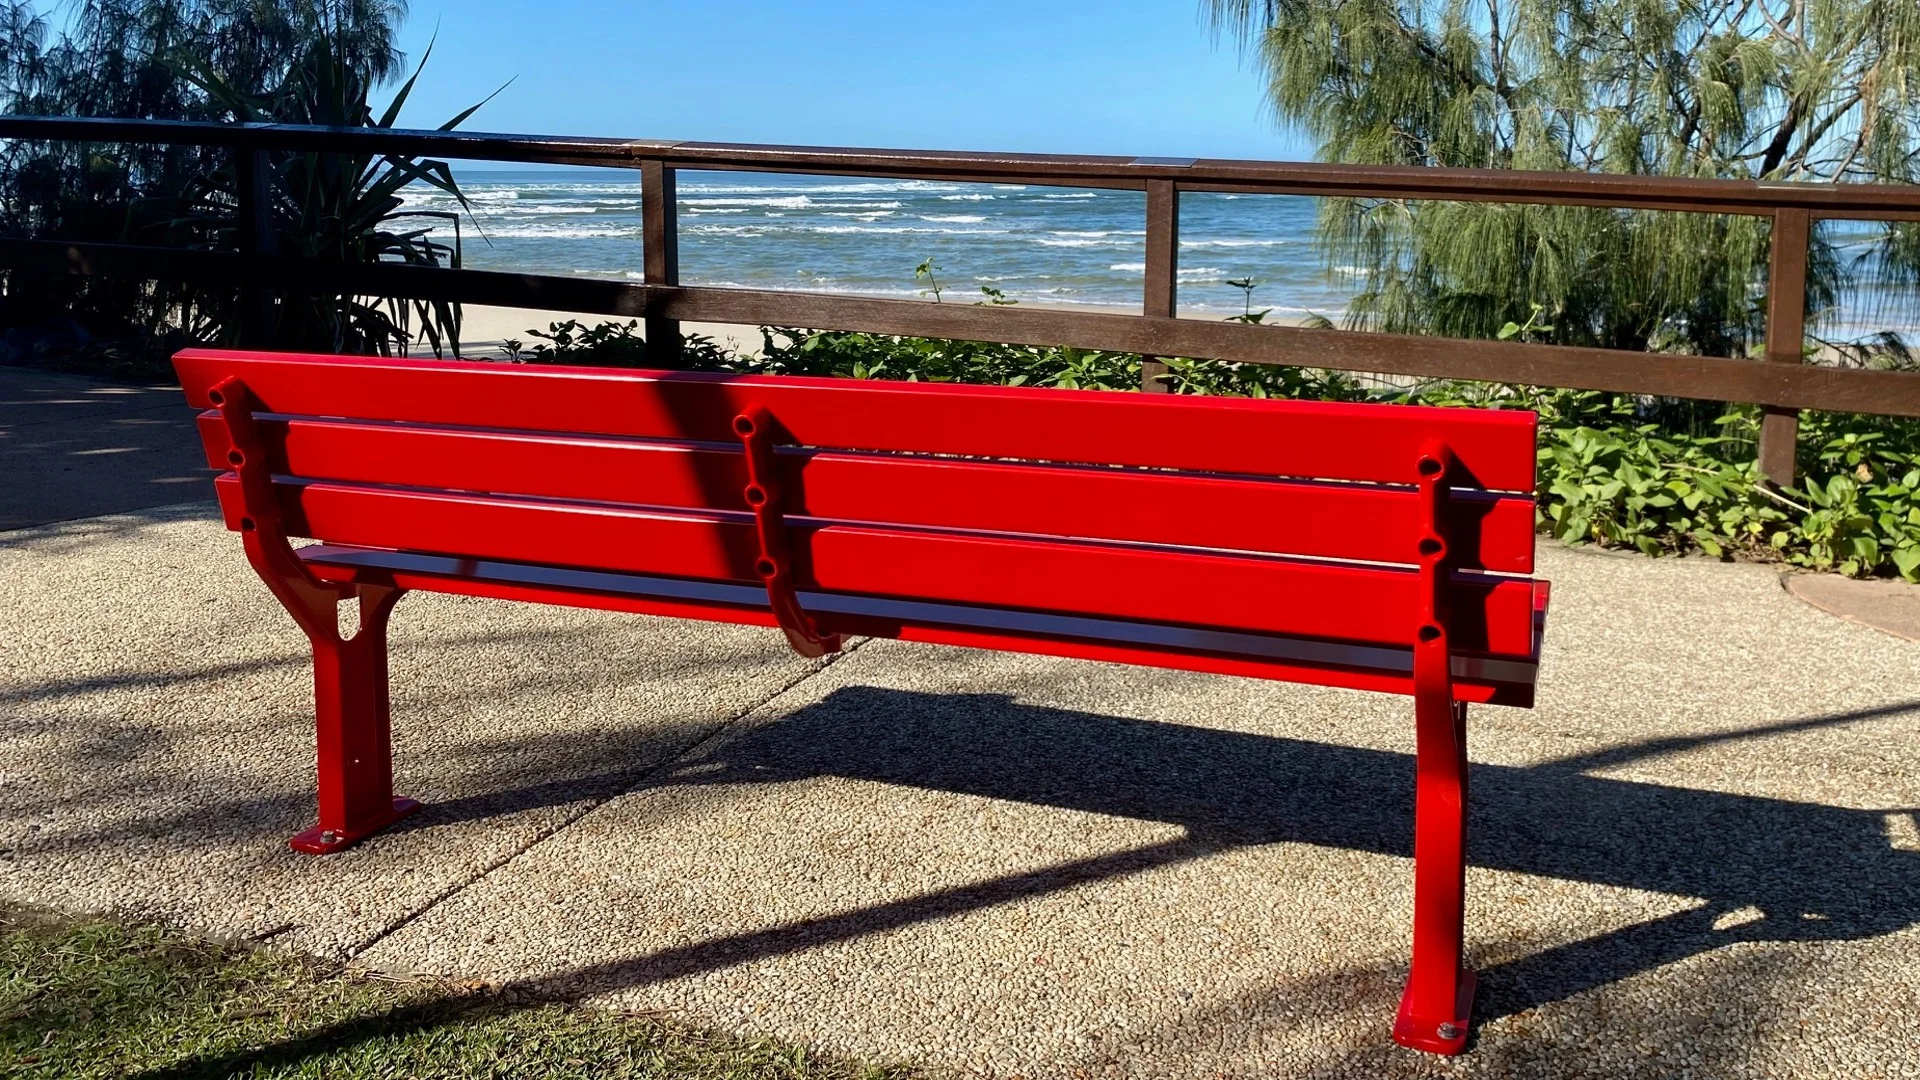 Red park bench looking out to the ocean.